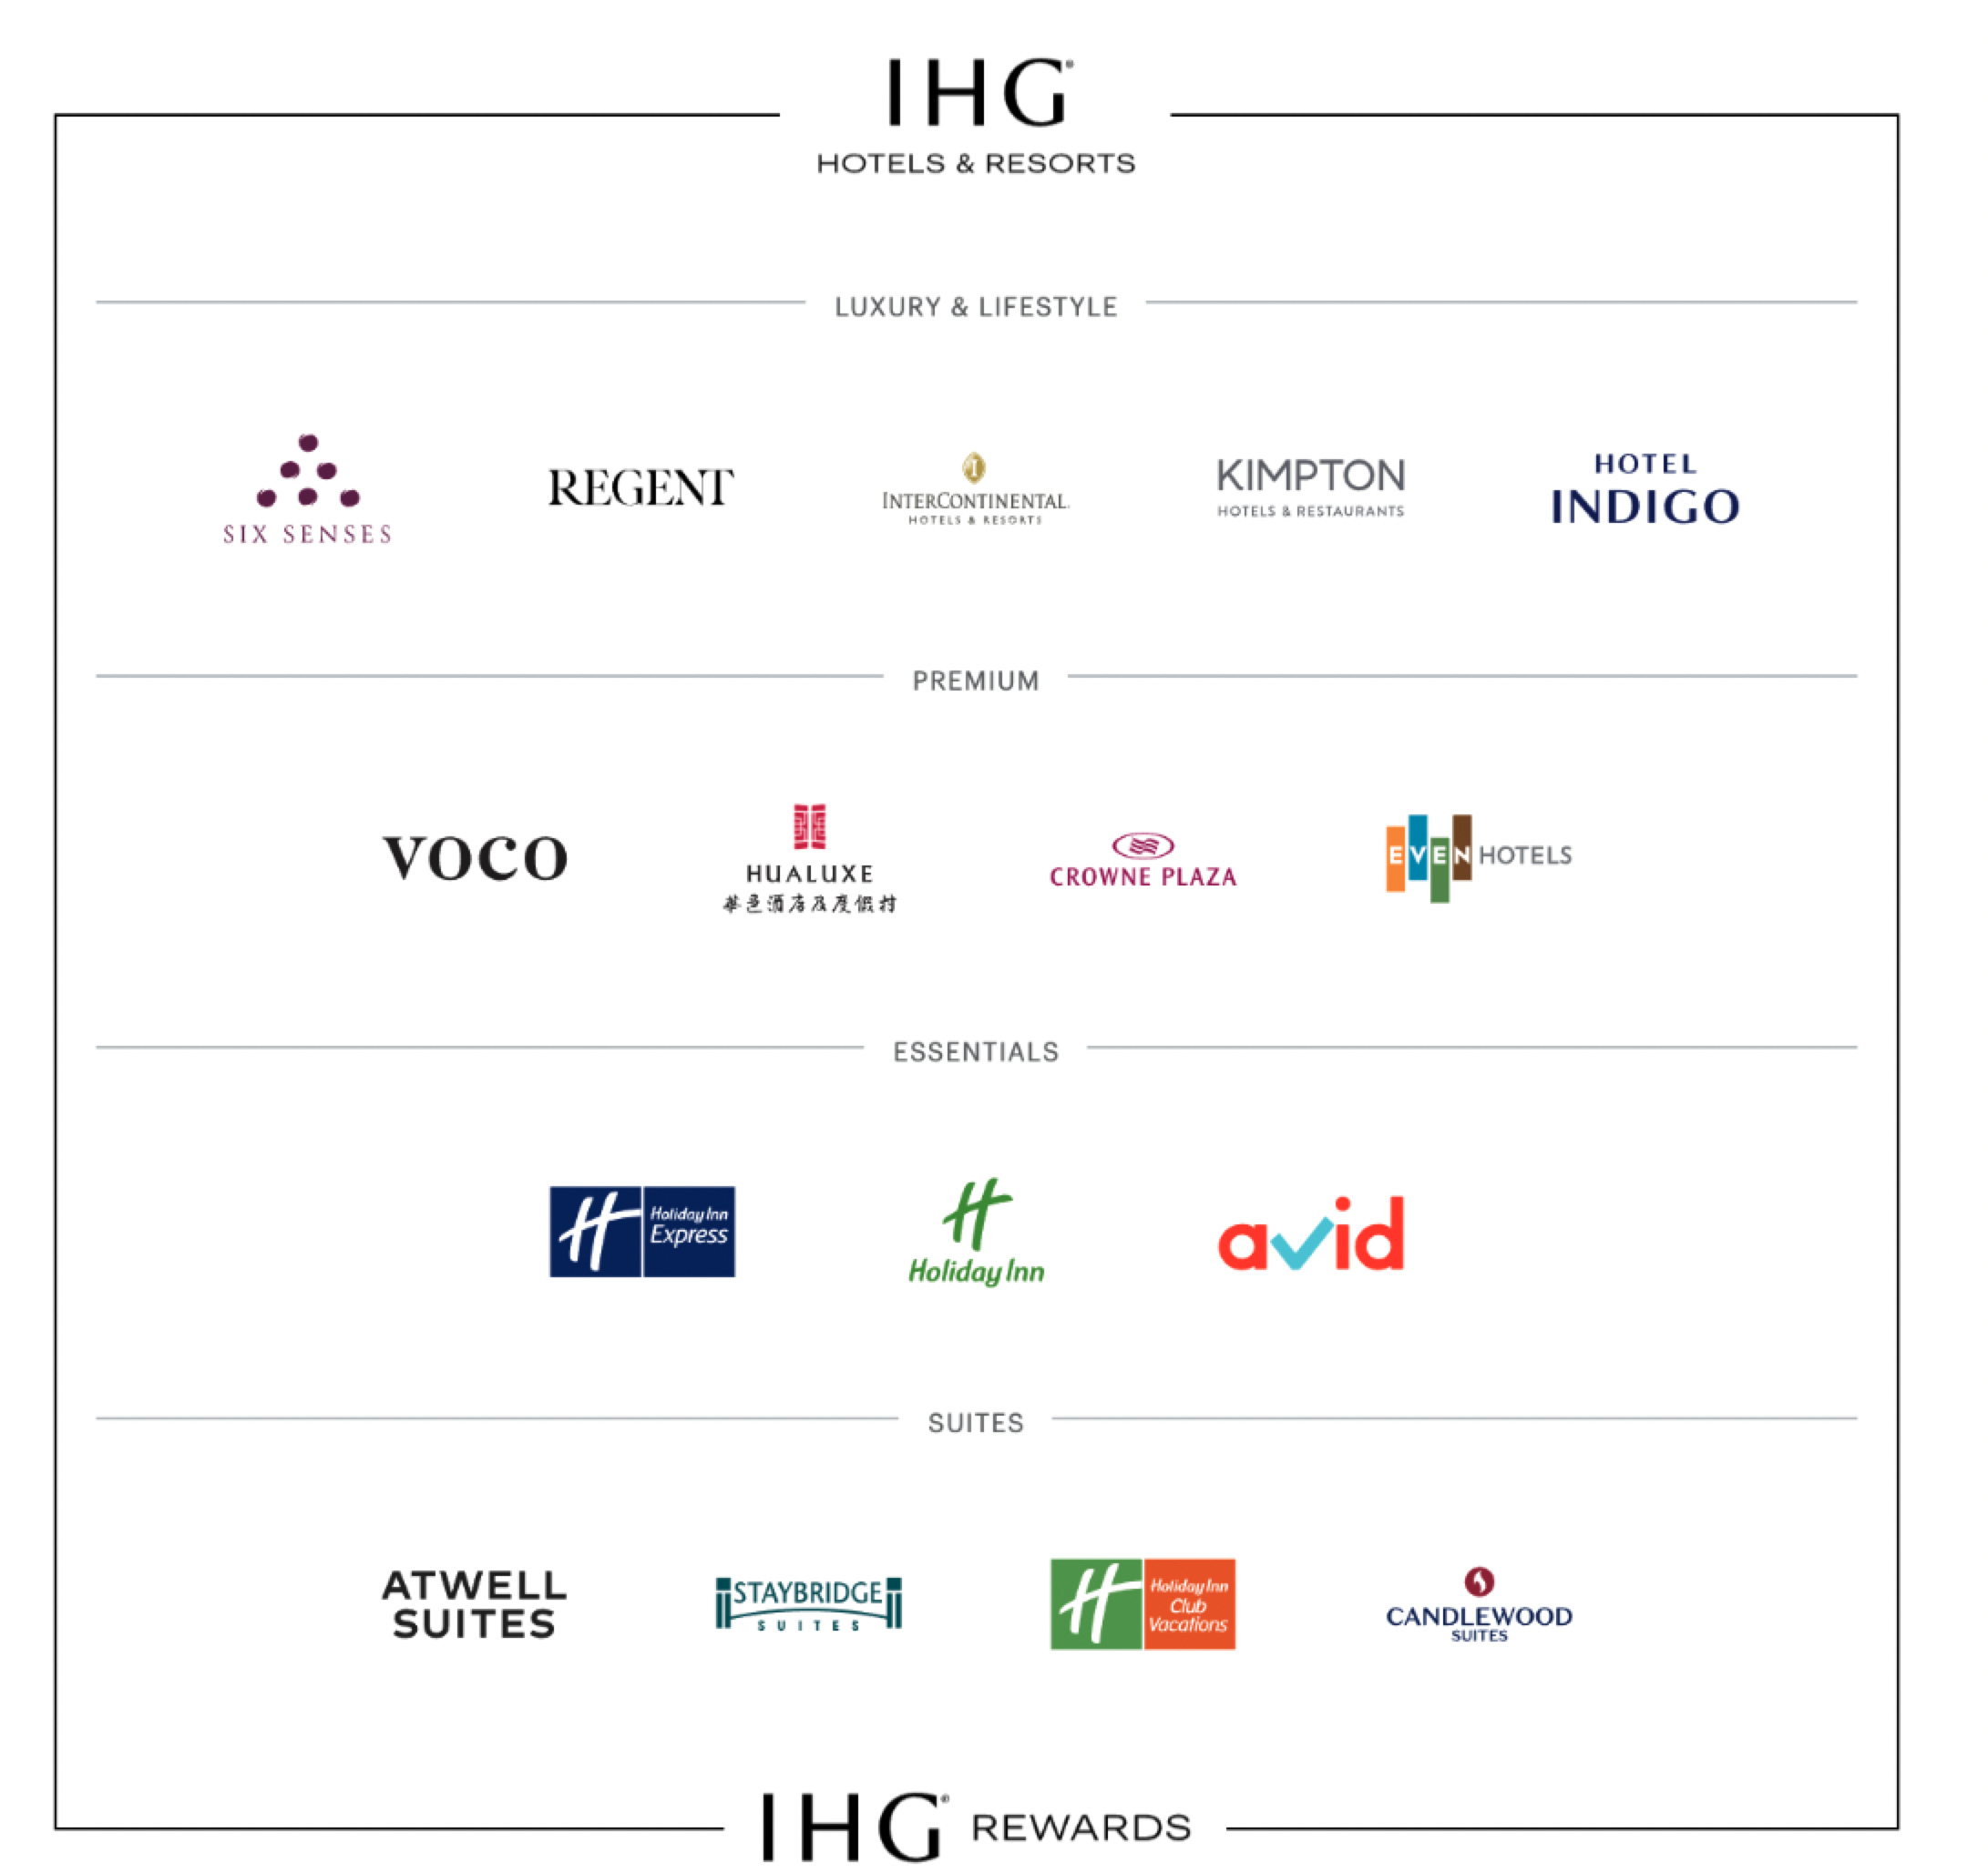 IHG (InterContinental Hotel Group) falls victim to cyberattack, causing havoc to their systems